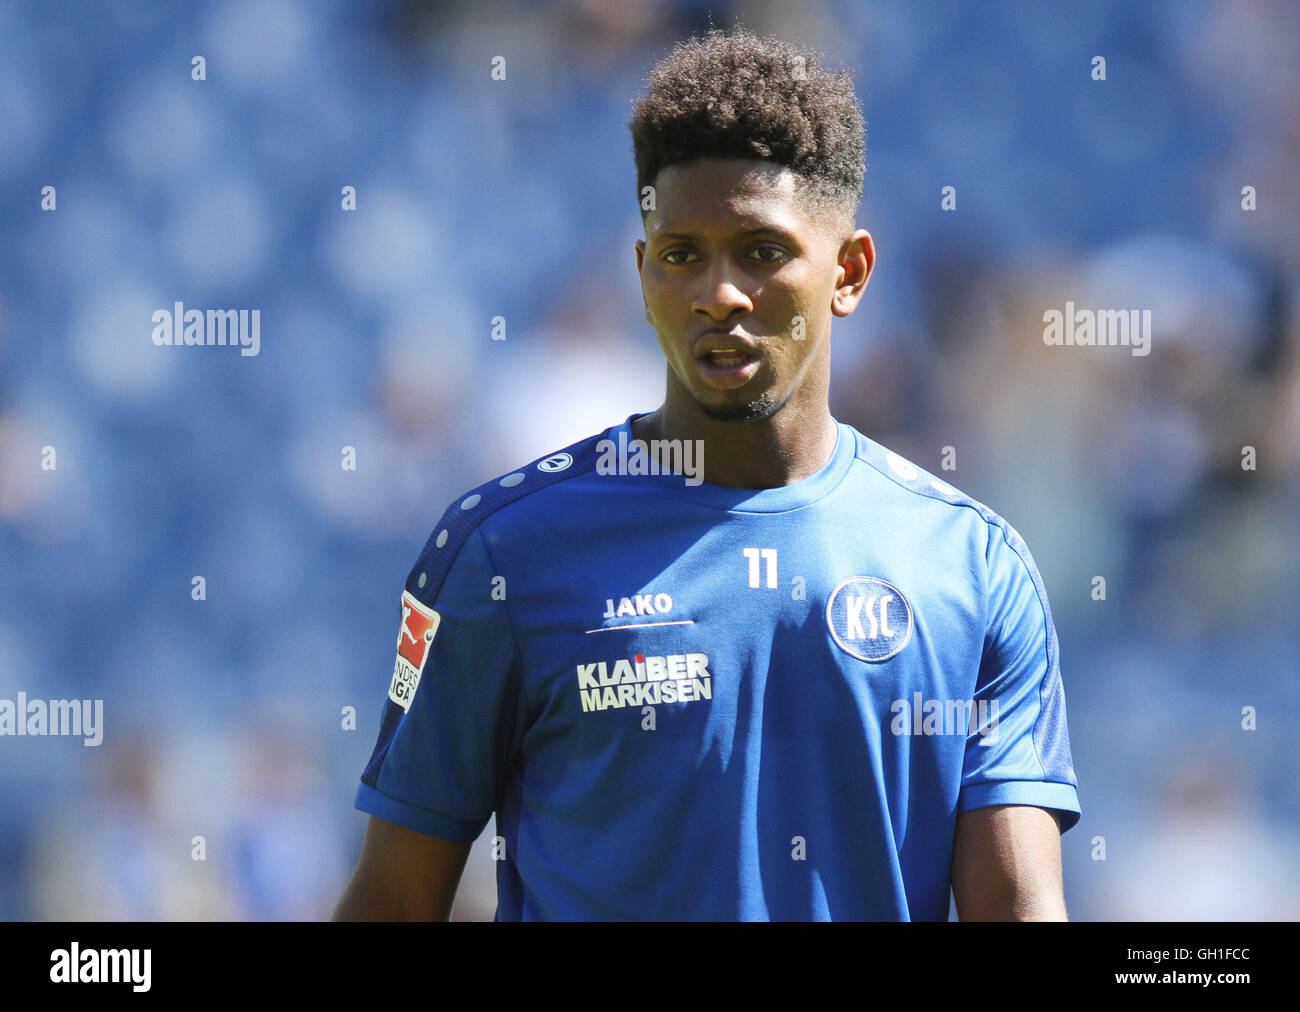 Bielefeld, Germany. 7th Aug, 2016. Karlsruhe's Boubacar Barry in action during the 2nd Bundesliga Soccer match between Arminia Bielefeld and Karlsruher SC at Schueco Arena in Bielefeld, Germany, 7 August 2016. PHOTO: OLIVER KRATO/dpa/Alamy Live News Stock Photo